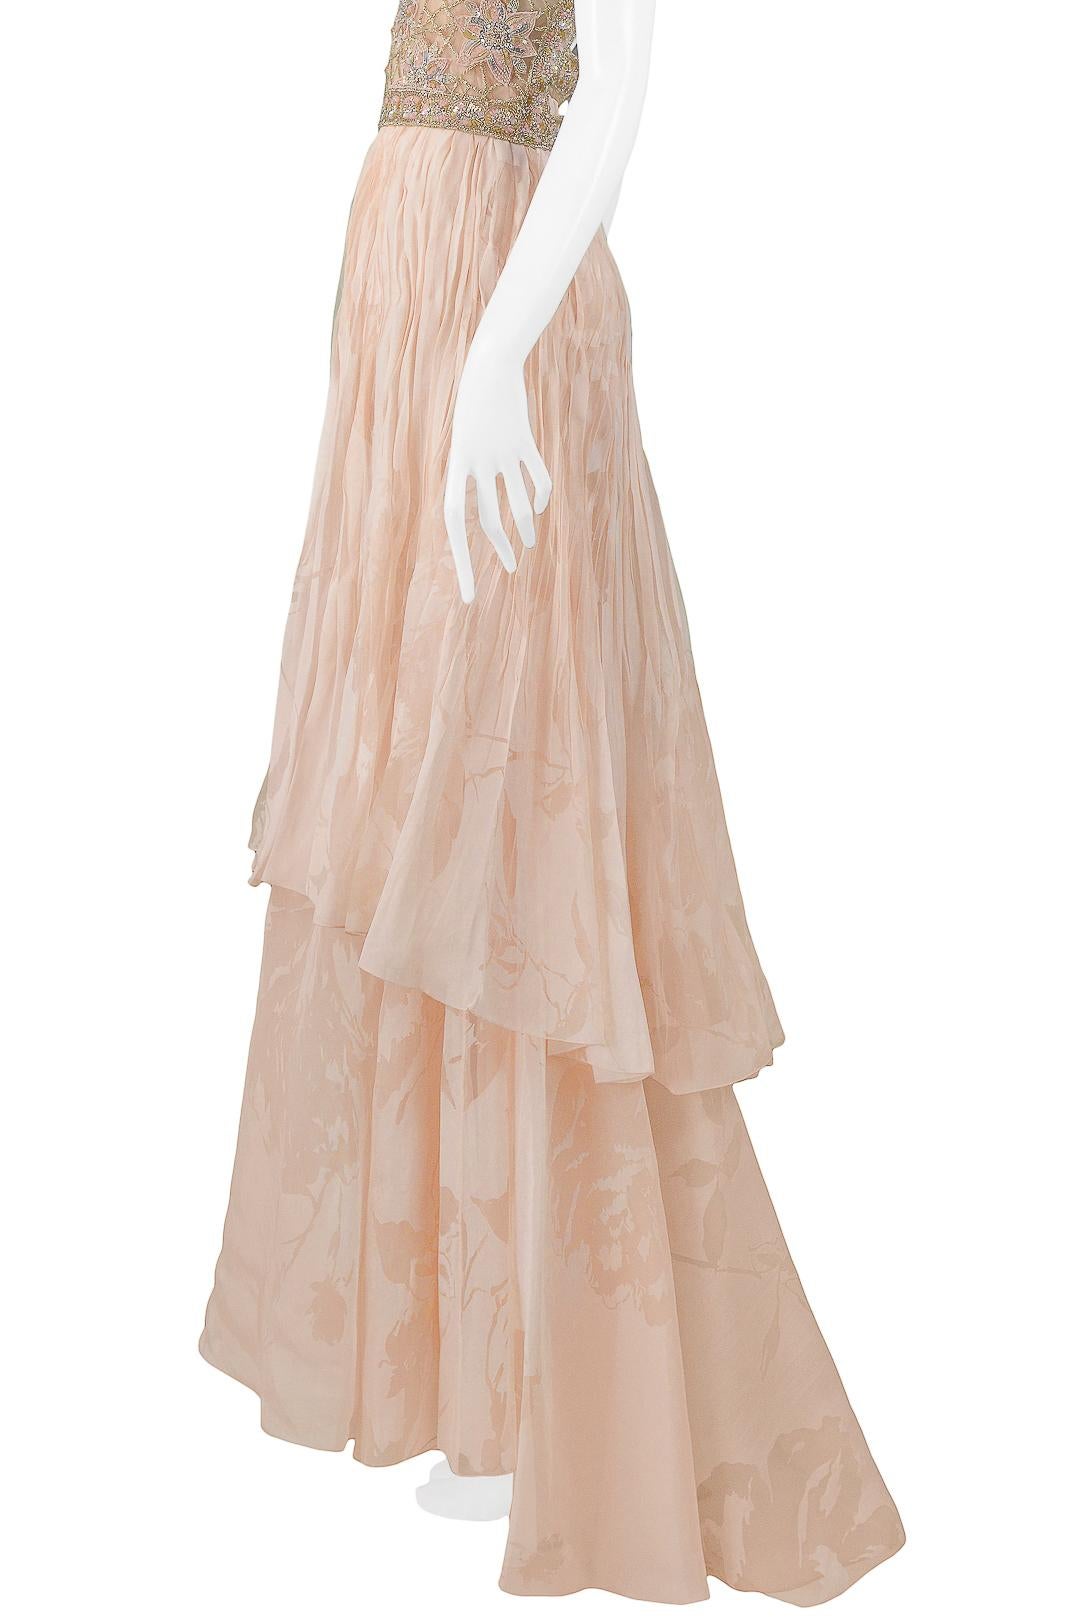 Women's Valentino Peach Floral Silk Runway Evening Gown with Beaded Belt 2007